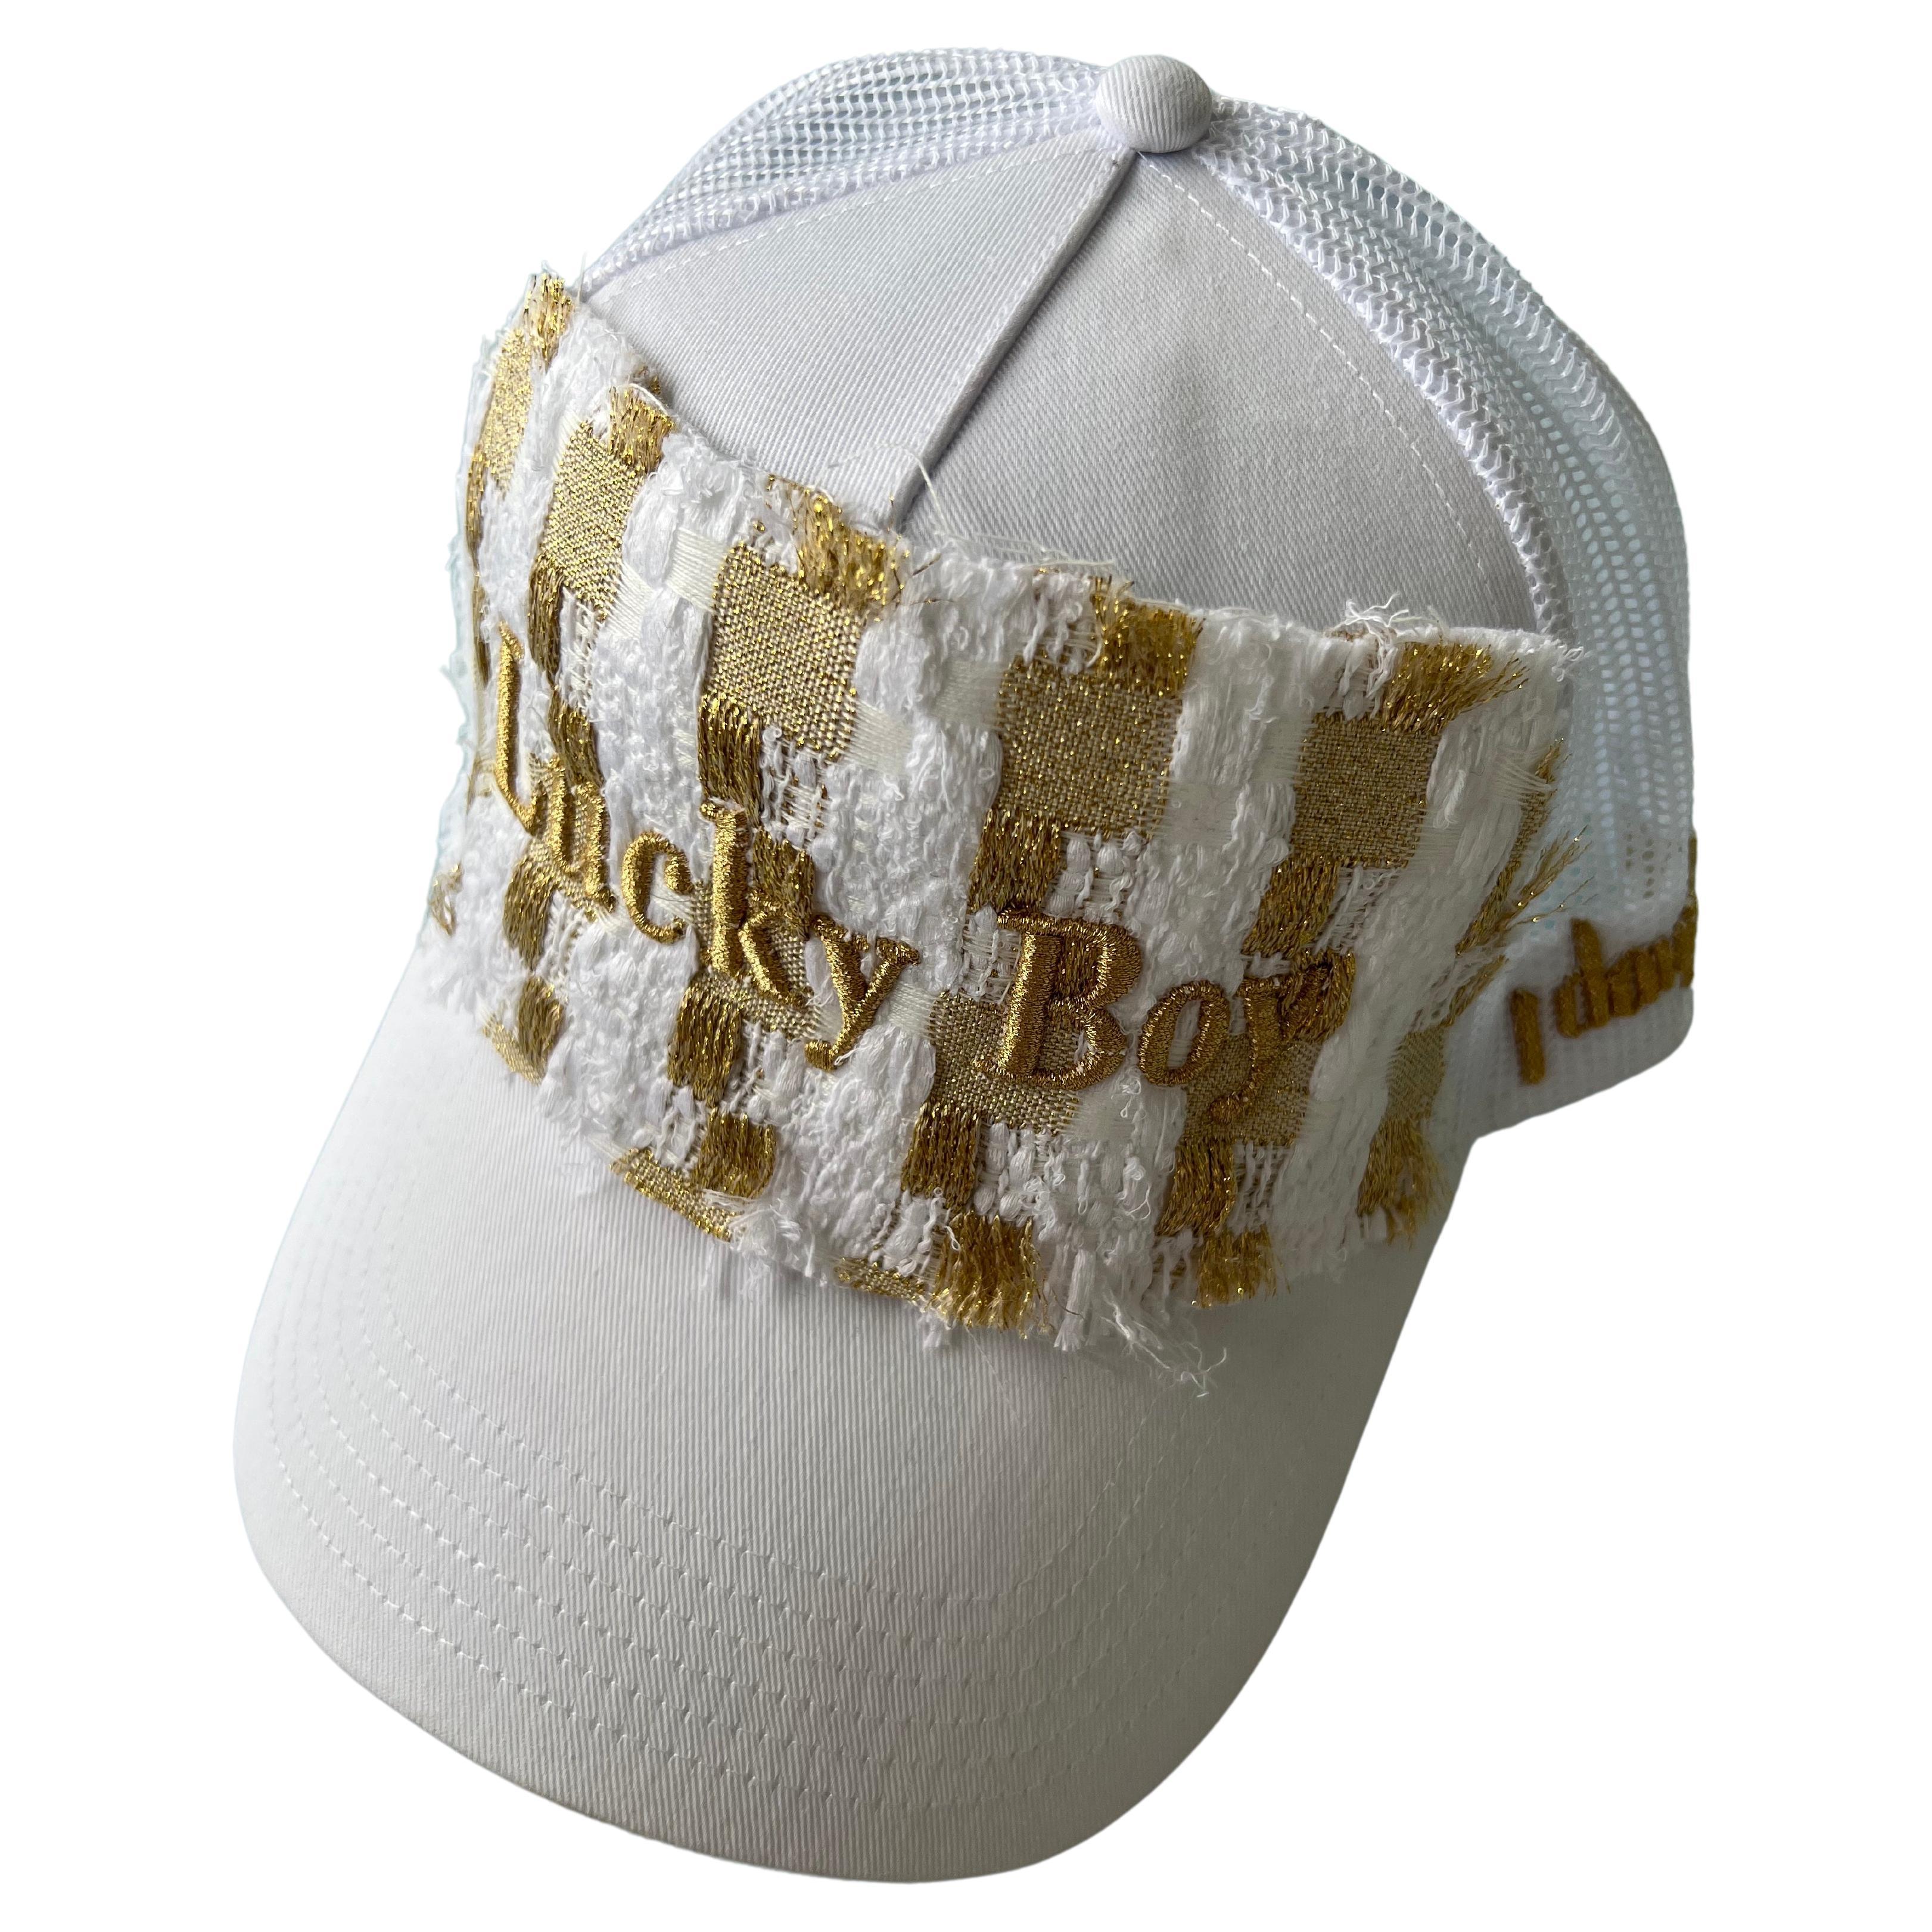 Women's or Men's Trucker Hat Cotton French White Tweed Gold Text Lucky Boy J Dauphin